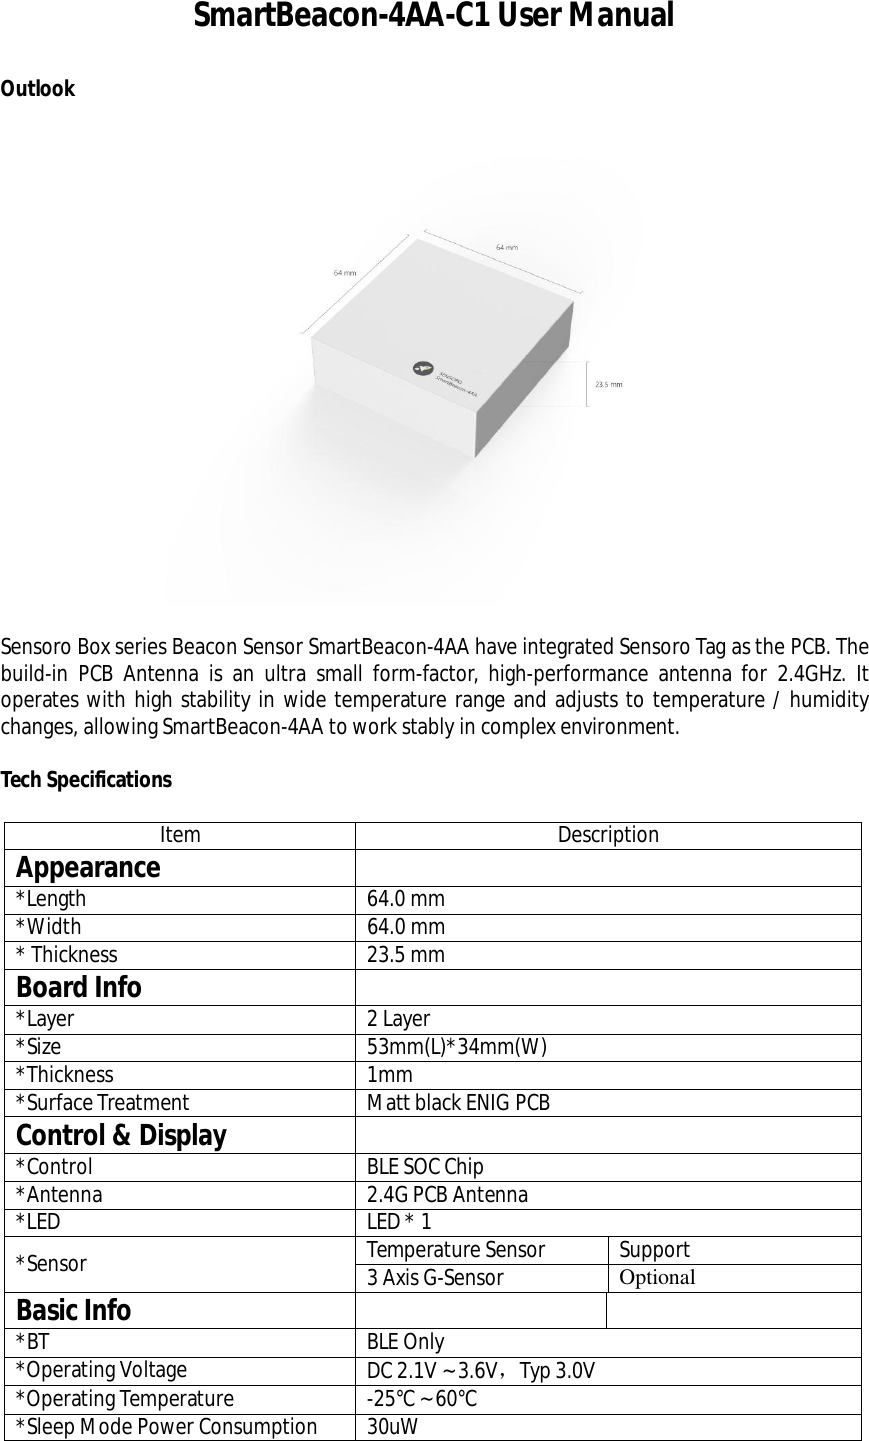 SmartBeacon-4AA-C1 User ManualOutlookSensoro Box series Beacon Sensor SmartBeacon-4AA have integrated Sensoro Tag as the PCB. Thebuild-in PCB Antenna is an ultra small form-factor, high-performance antenna for 2.4GHz. Itoperates with high stability in wide temperature range and adjusts to temperature / humiditychanges, allowing SmartBeacon-4AA to work stably in complex environment.Tech SpecificationsItem DescriptionAppearance*Length 64.0 mm*Width 64.0 mm* Thickness 23.5 mmBoard Info*Layer 2Layer*Size 53mm(L)*34mm(W)*Thickness 1mm*SurfaceTreatment Matt black ENIG PCBControl &amp; Display*Control BLE SOC Chip*Antenna 2.4G PCB Antenna*LED LED*1*Sensor Temperature Sensor Support3 Axis G-Sensor OptionalBasic Info*BT BLE Only*Operating Voltage DC 2.1V ~ 3.6V，Typ 3.0V*Operating Temperature -25°C ~ 60°C*Sleep Mode Power Consumption 30uW